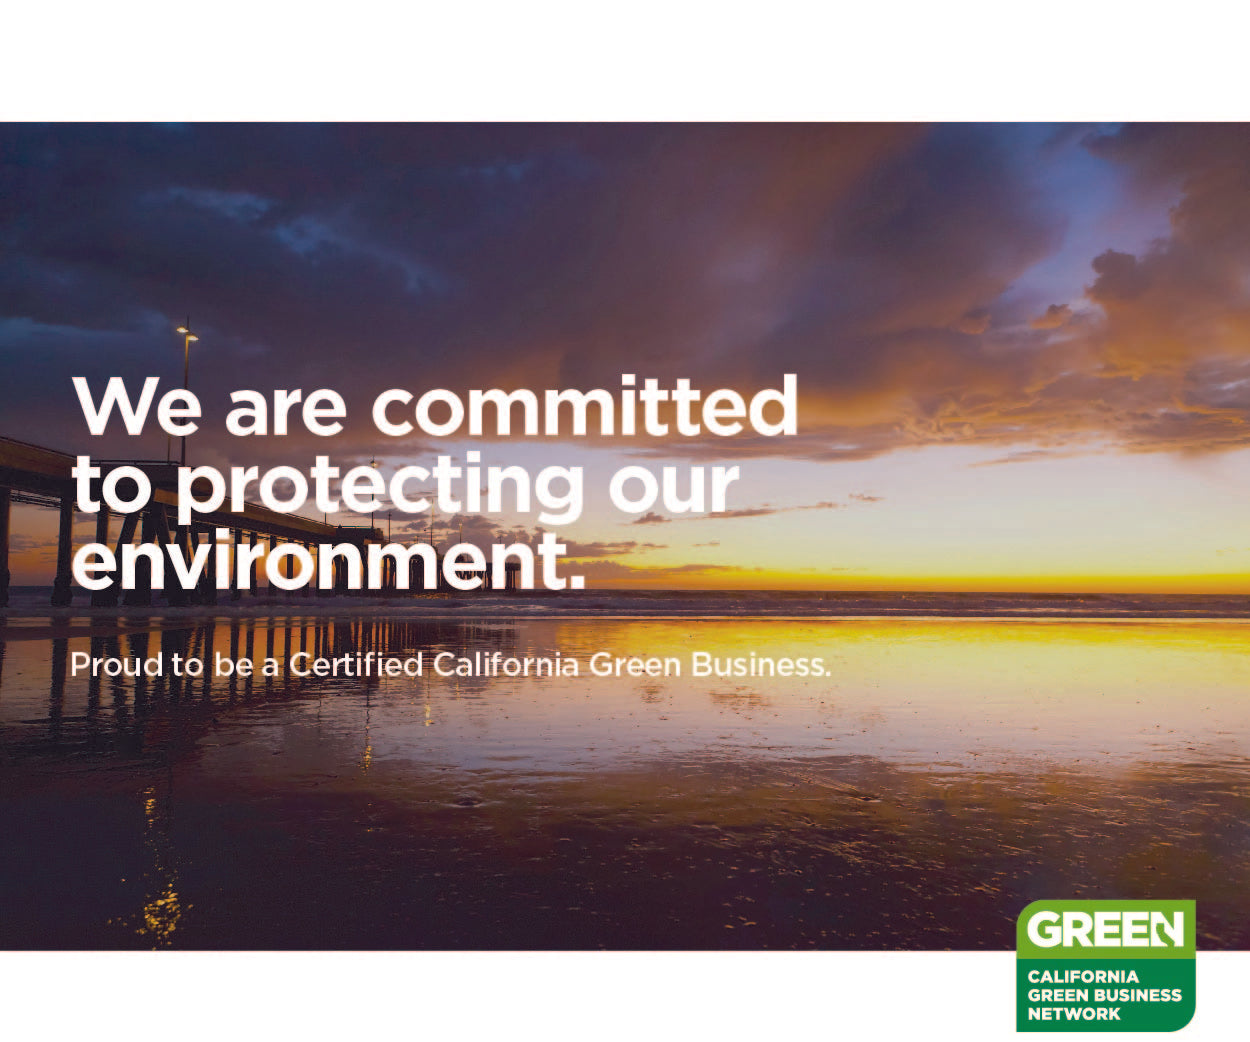 We’re a Certified California Green Business